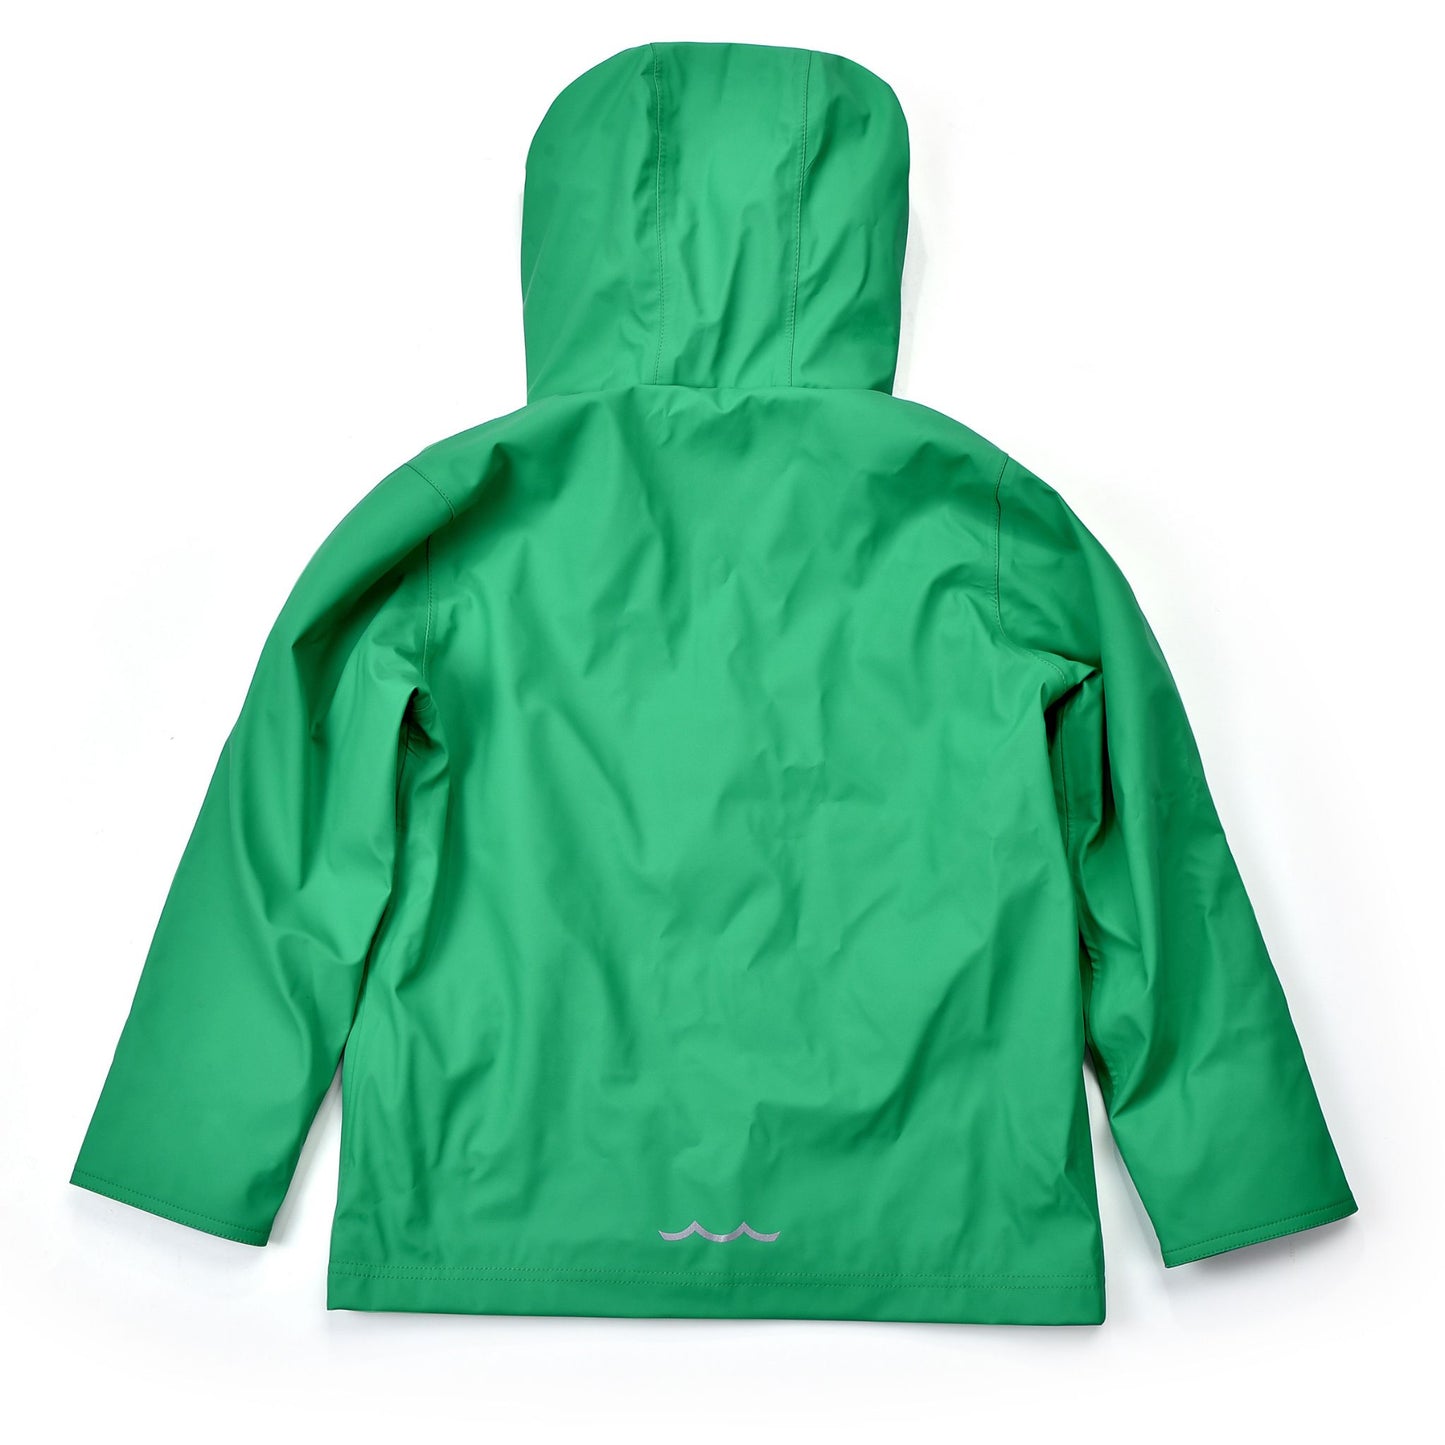 The back of a Green Raincoat 